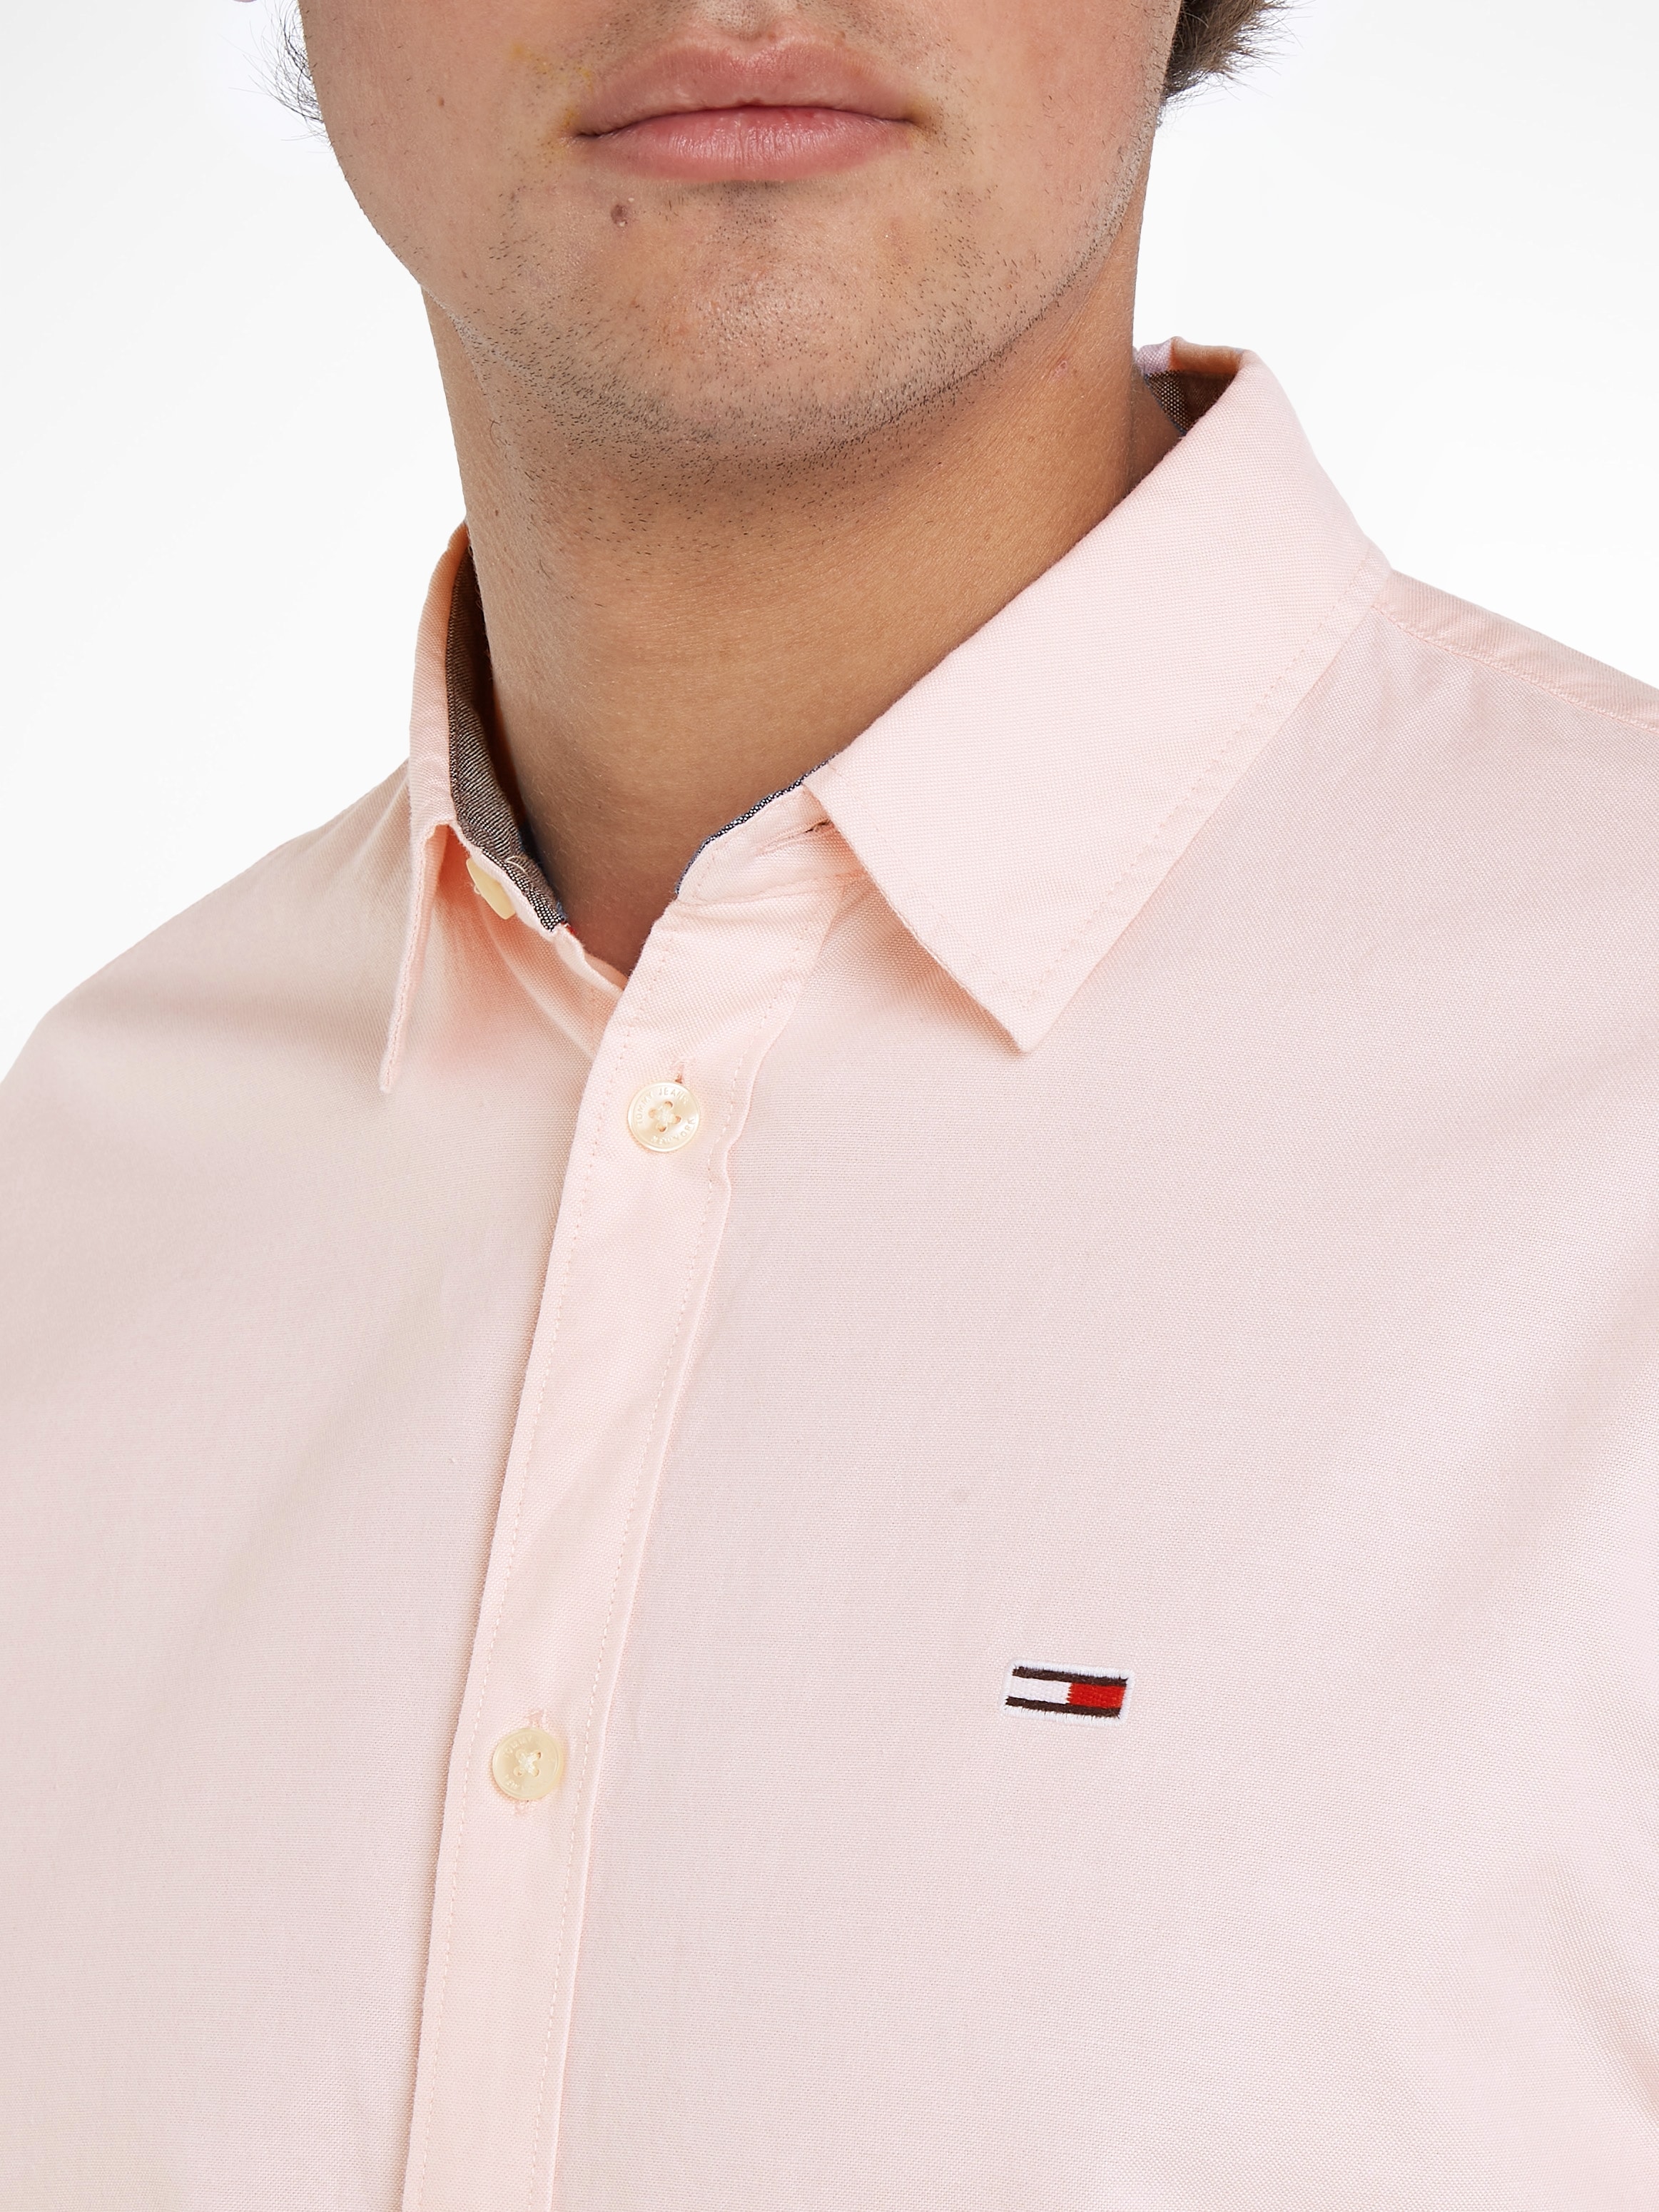 Tommy Jeans Langarmhemd CLASSIC OXFORD bei SHIRT« OTTO shoppen online »TJM